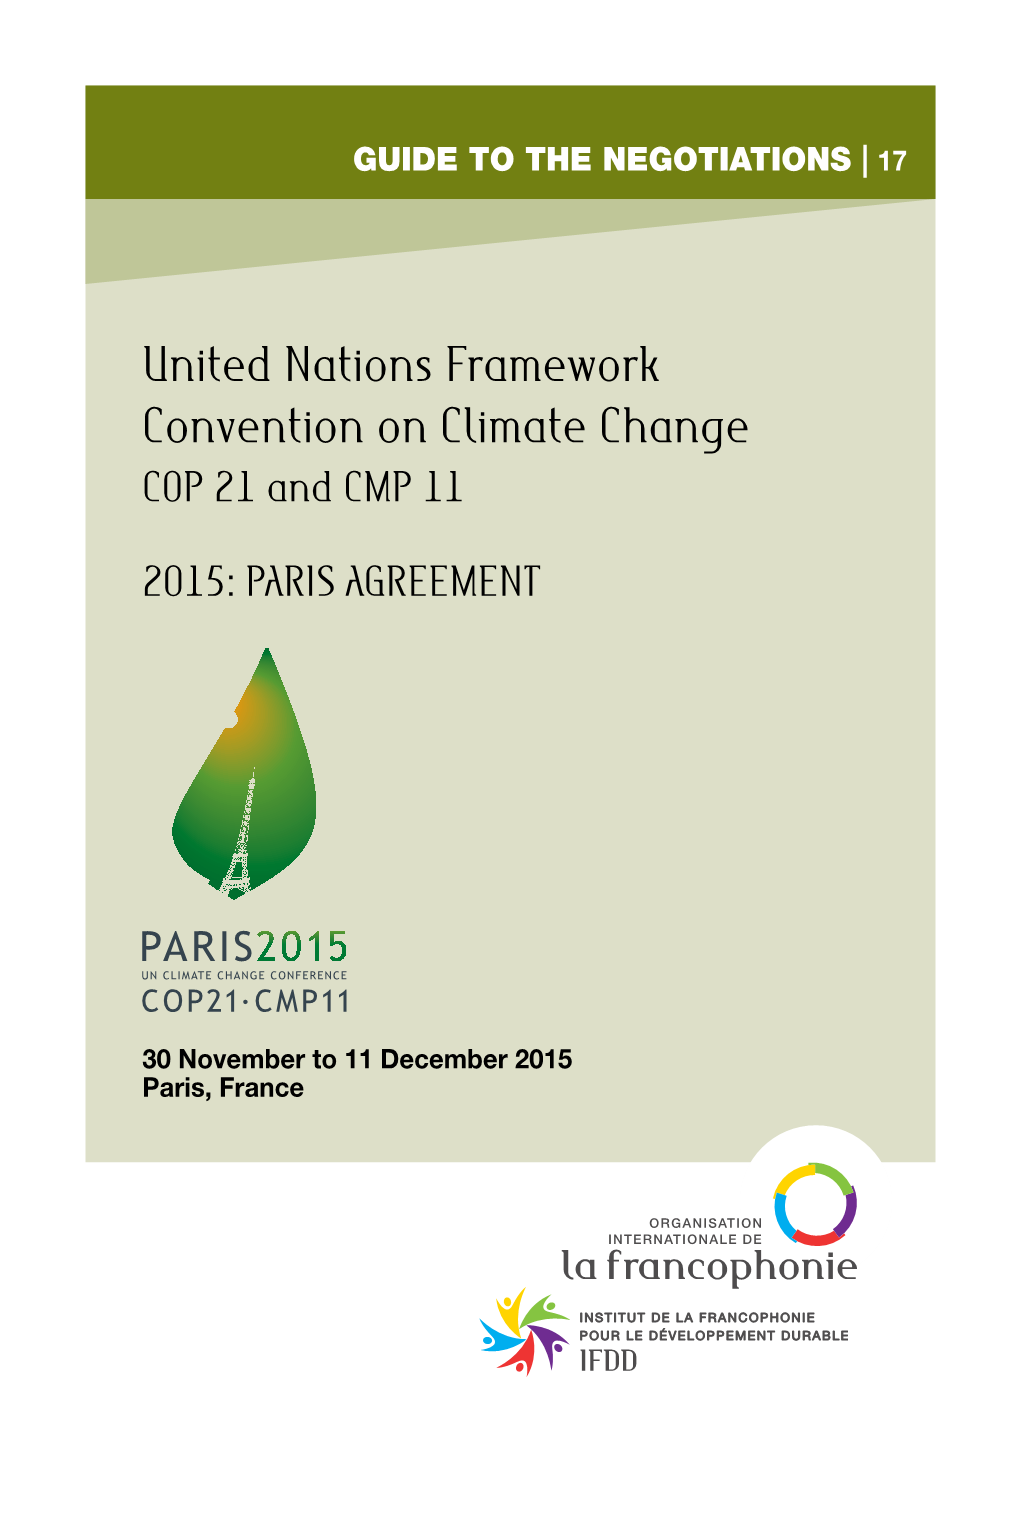 United Nations Framework Convention on Climate Change COP 21 and CMP 11